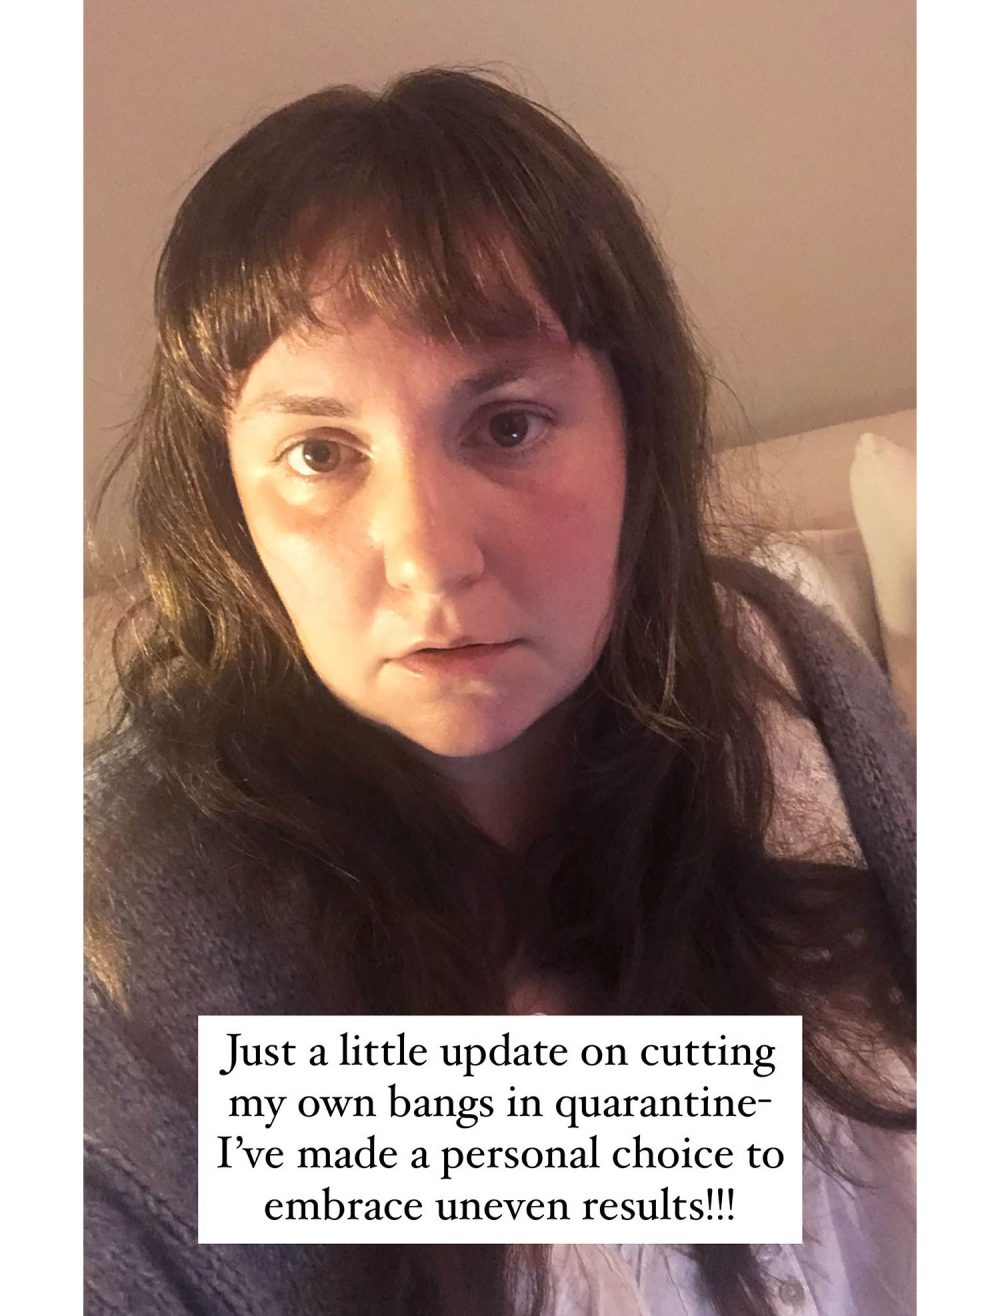 Lena Dunham Is ‘Embracing Uneven Results’ as She Cuts Her Own Bangs